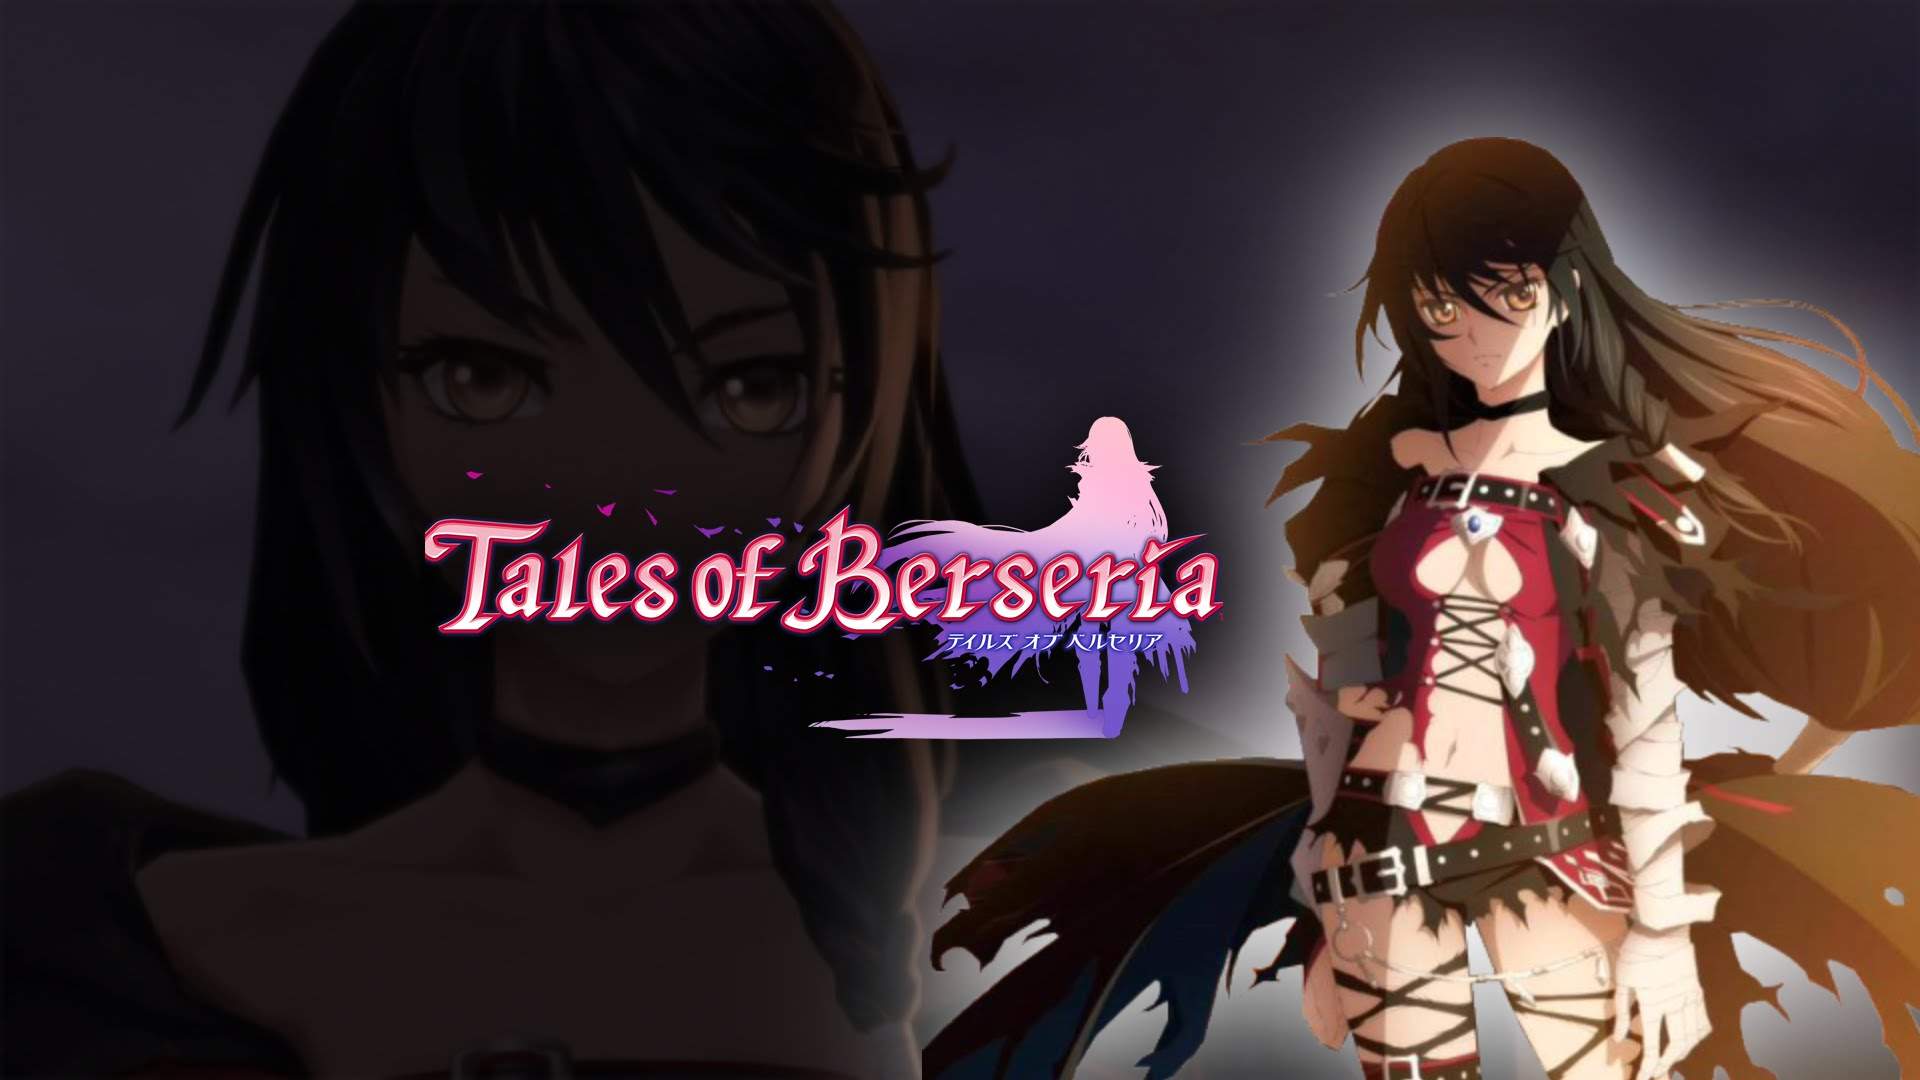 Tales of Berseria': 5 Fast Facts You Need to Know